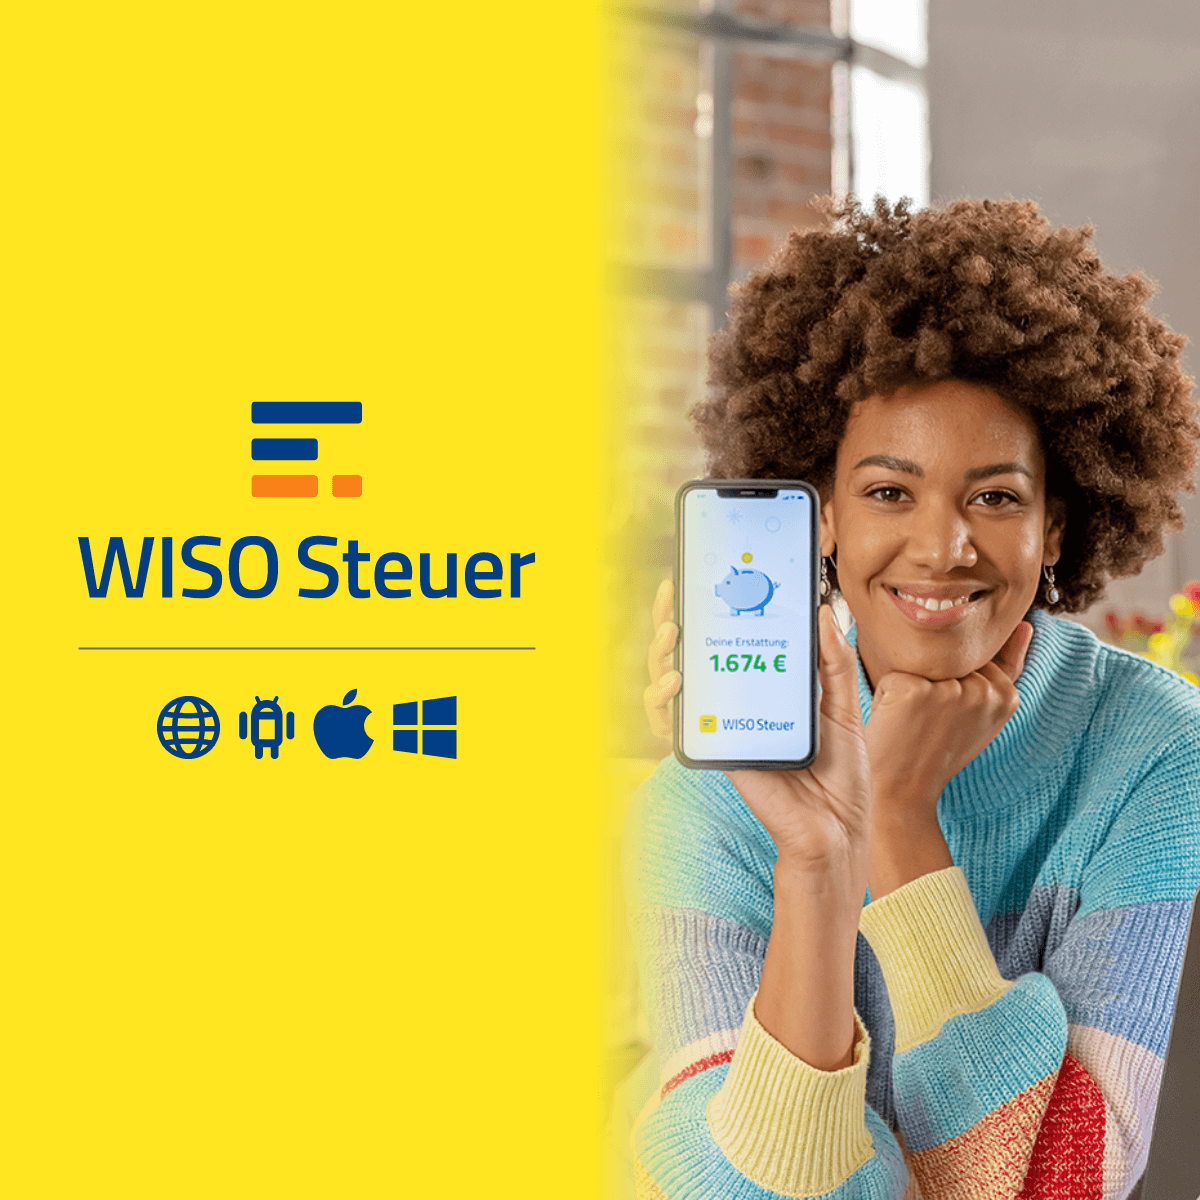 Alt: WISO Steuer Product OS